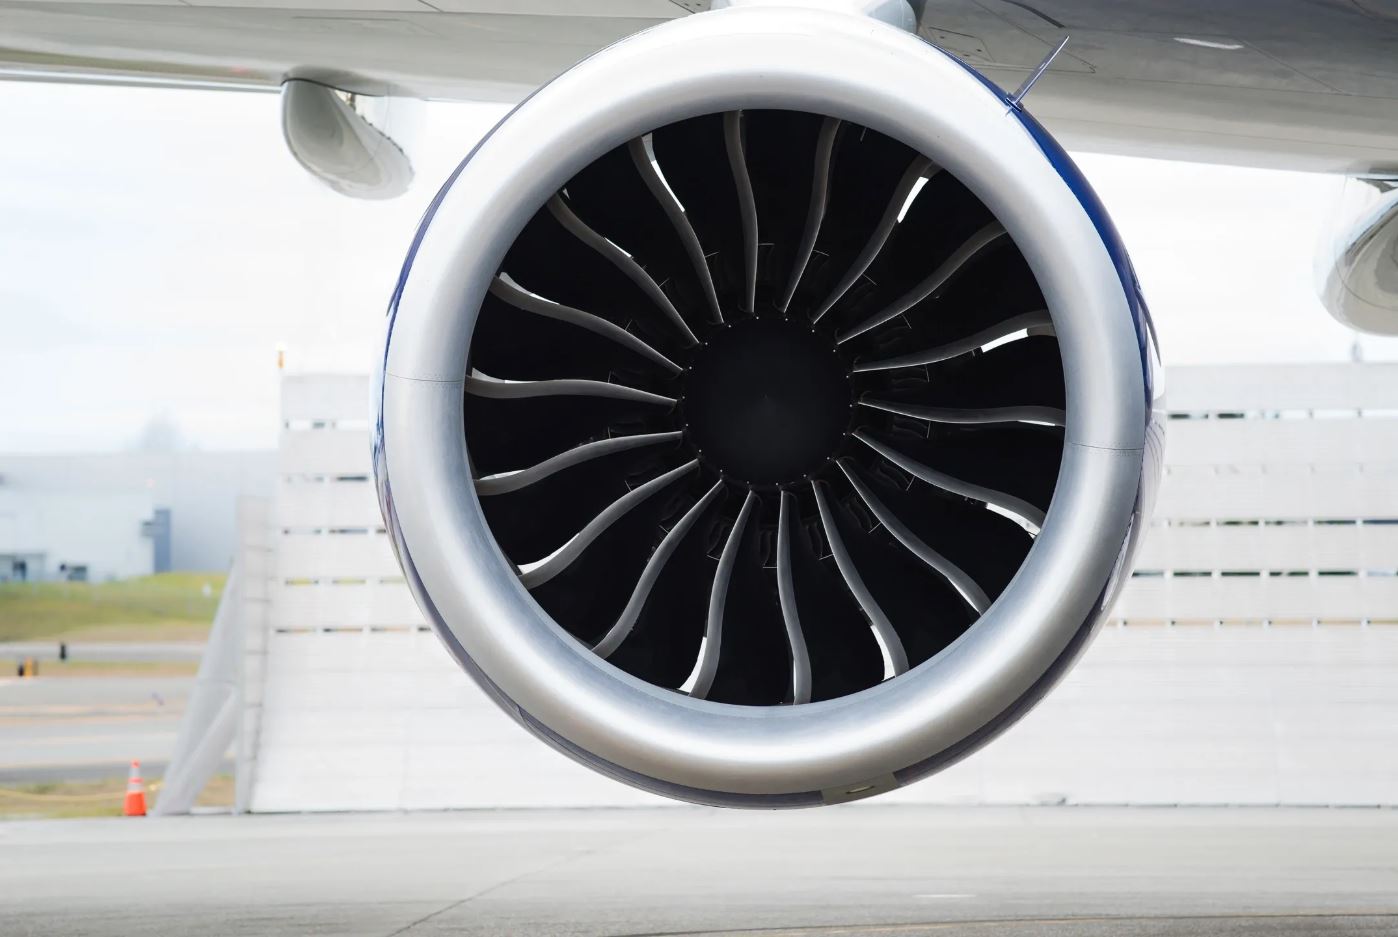 A close up of the engine on an airplane